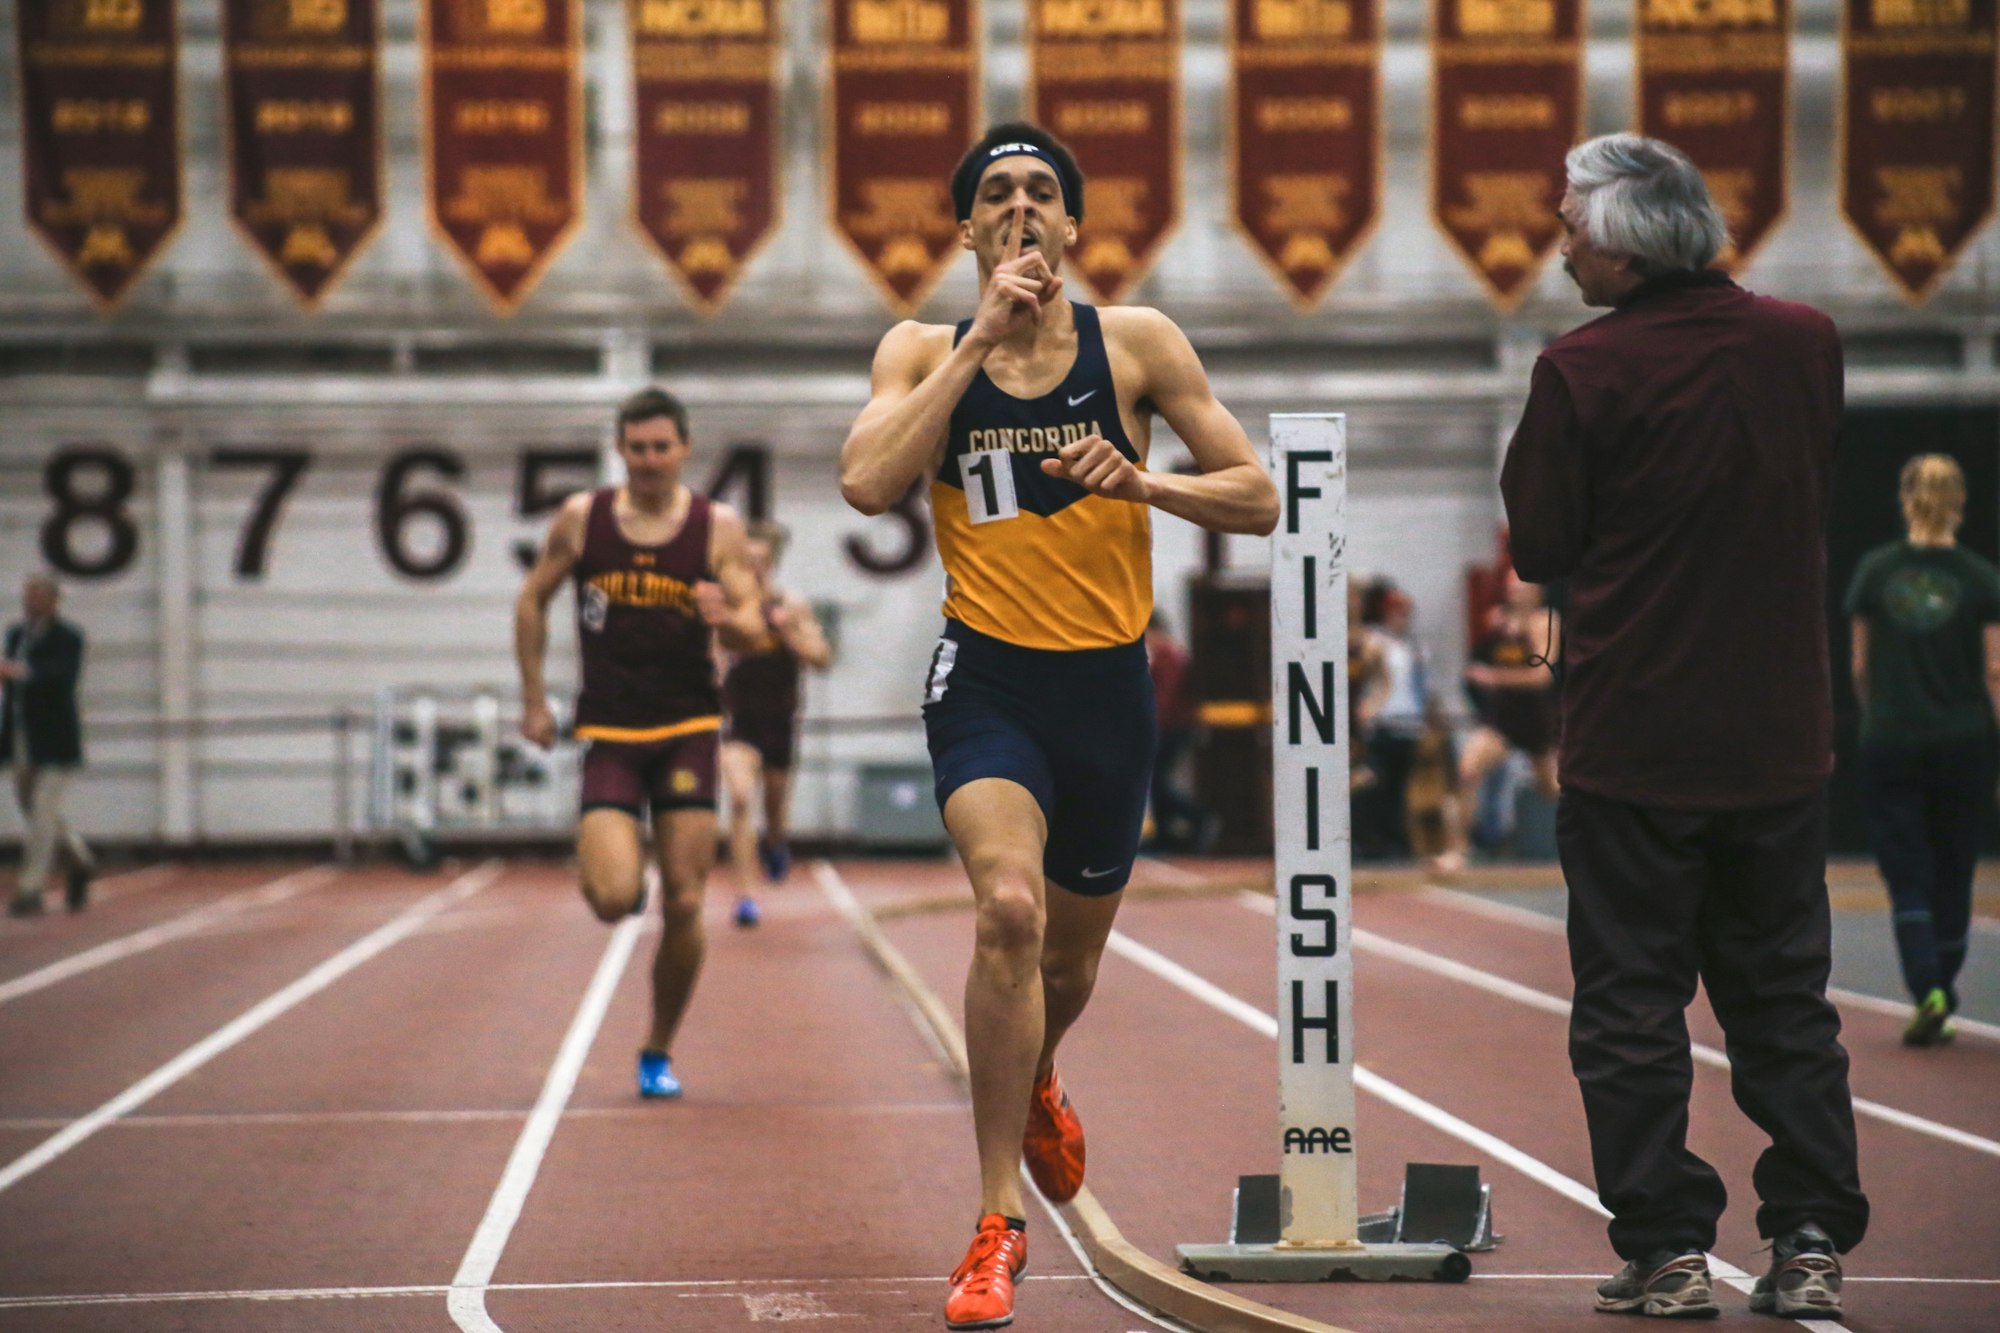 My buddy Benjamin Allen winning his track race at the University of Minnesota, Twin Cities at the indoor field house